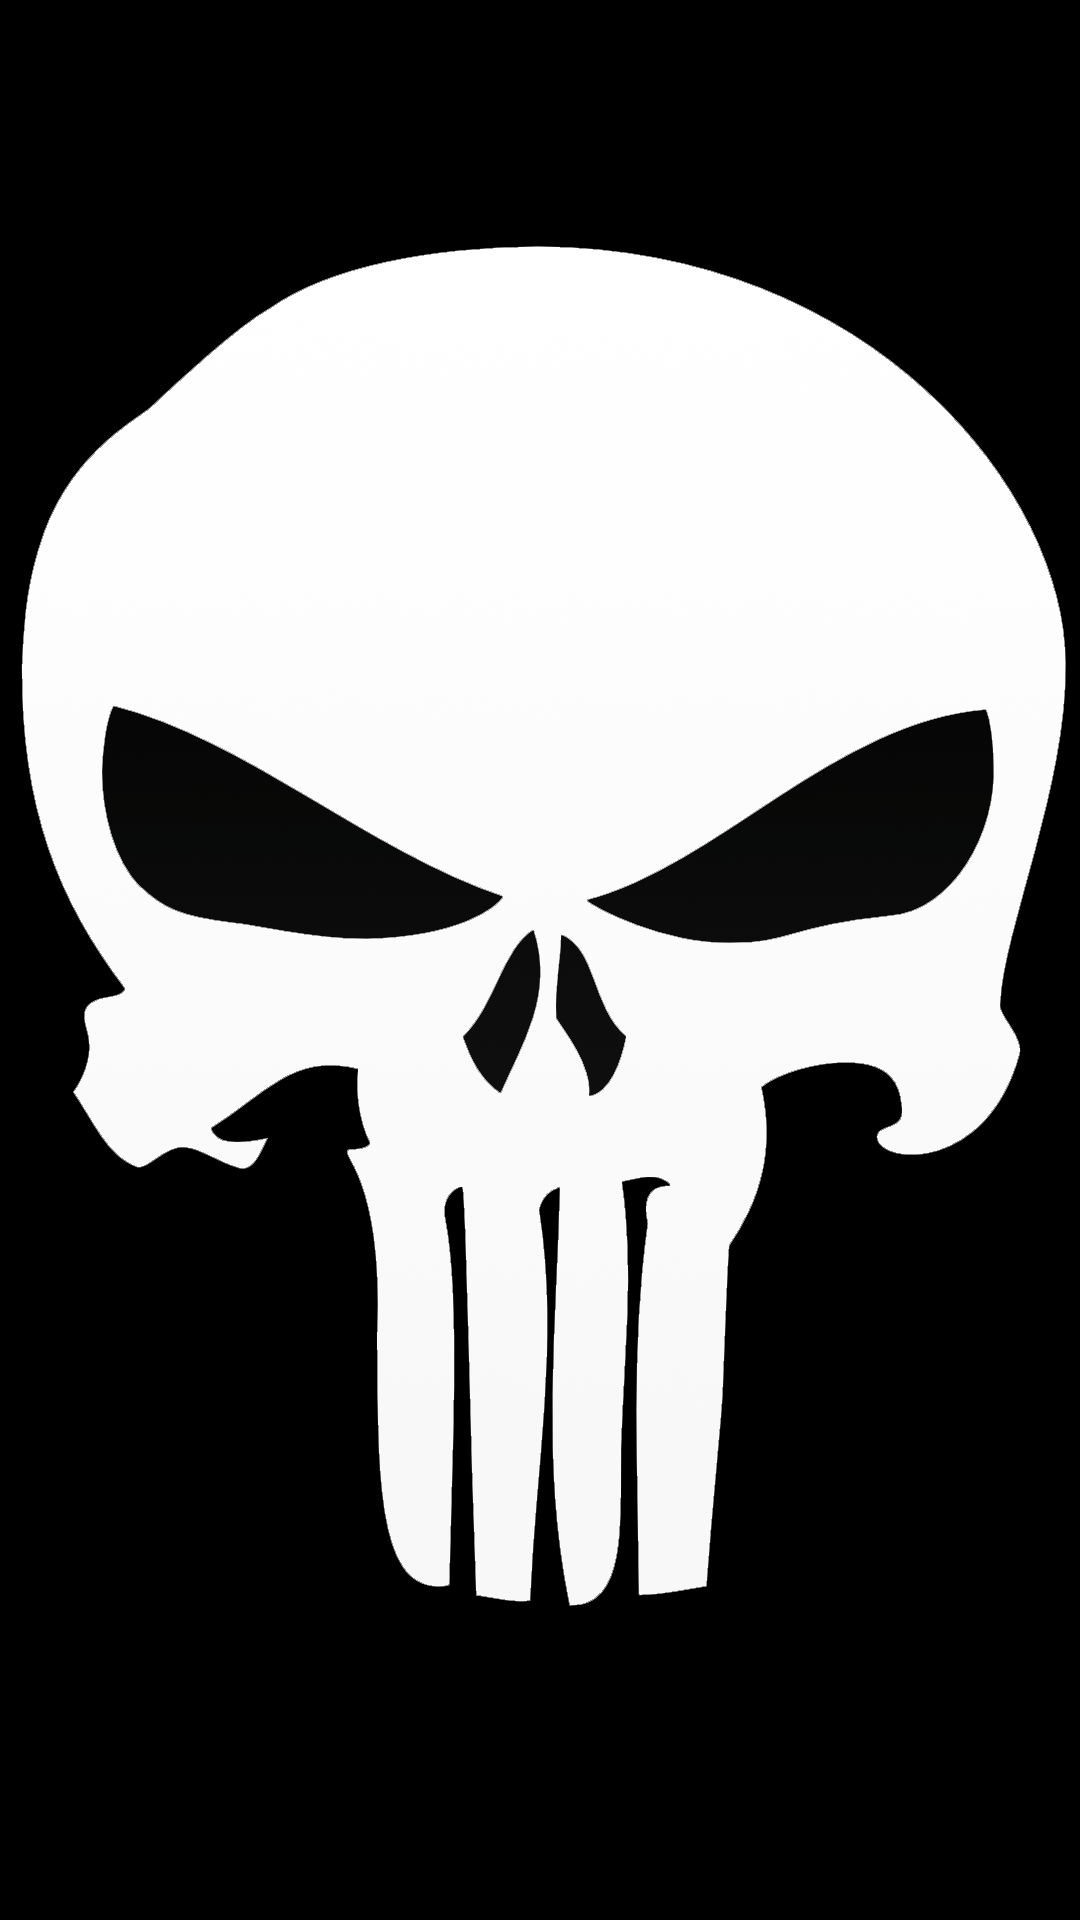 Download Our HD Punisher Skull Wallpaper For Android Phones .0223